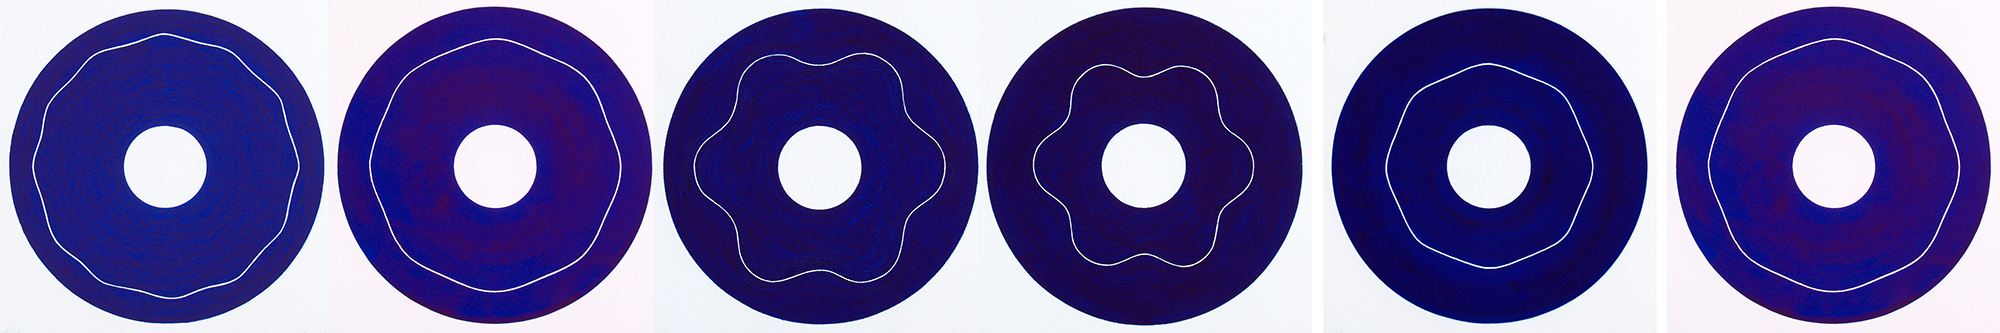 "Iris/1-6", 2000. Suite of six etchings, editions of 20.